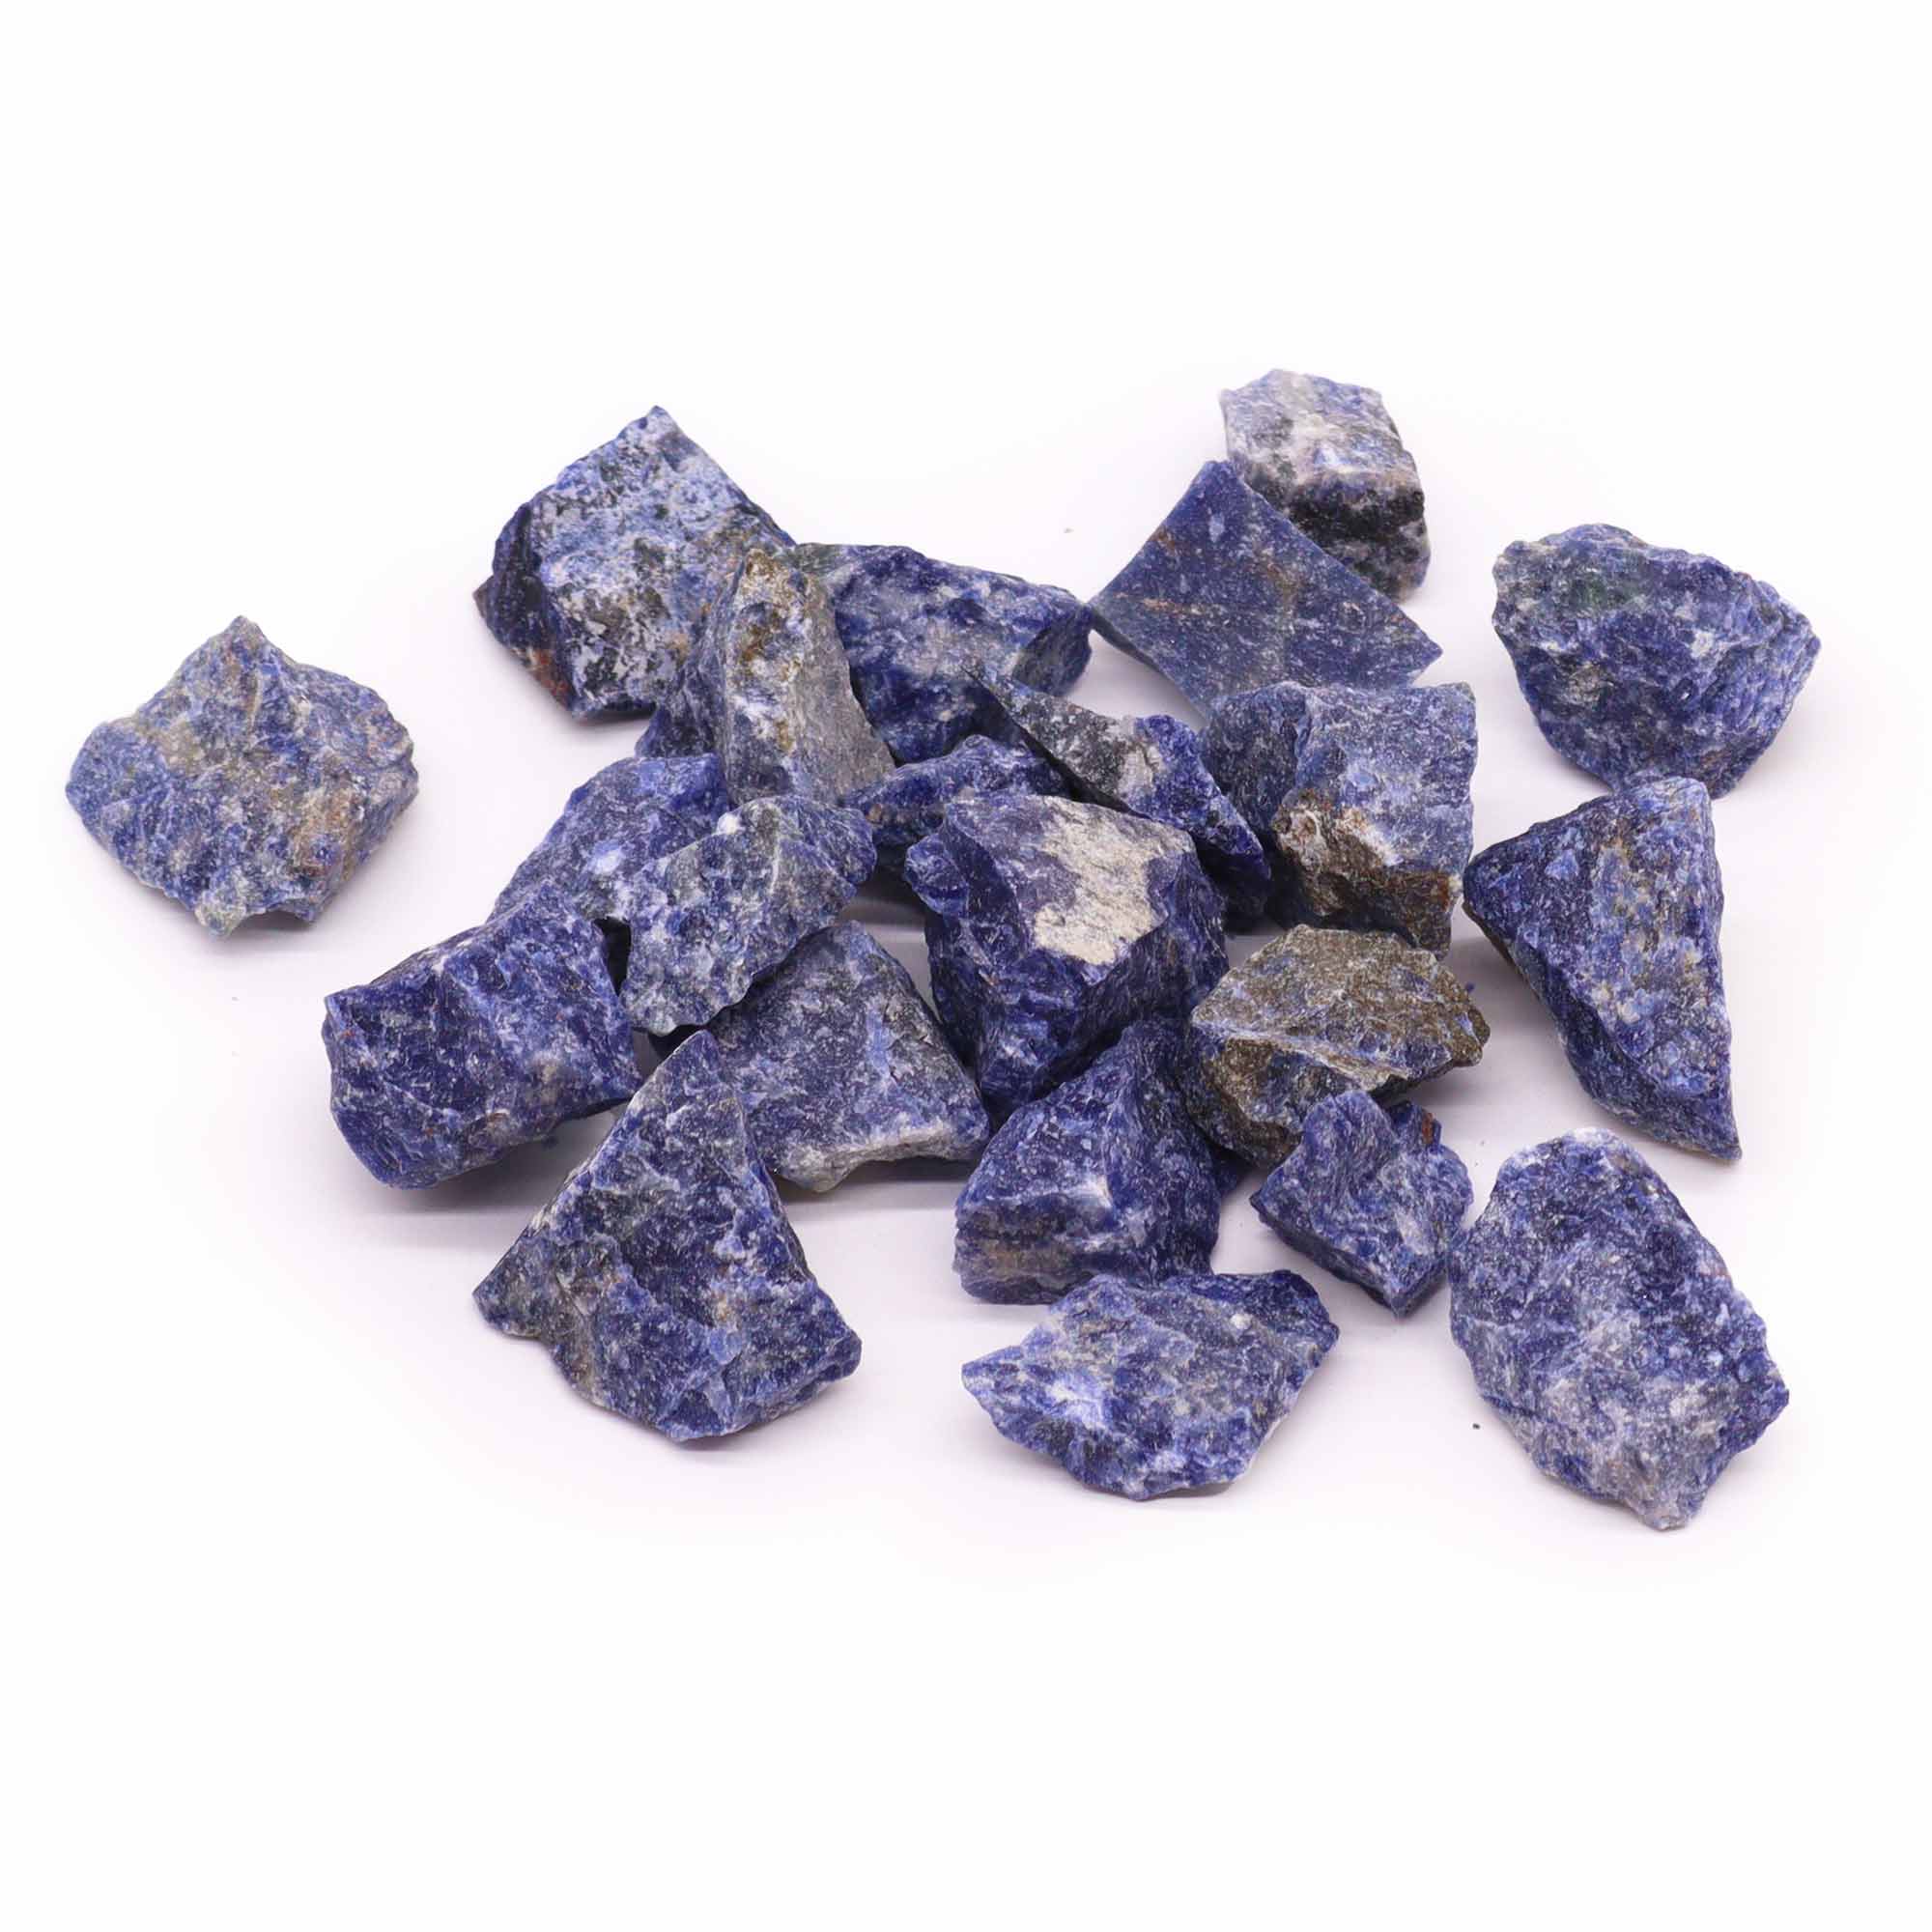 View Raw Crystals 500gm Sodalite information